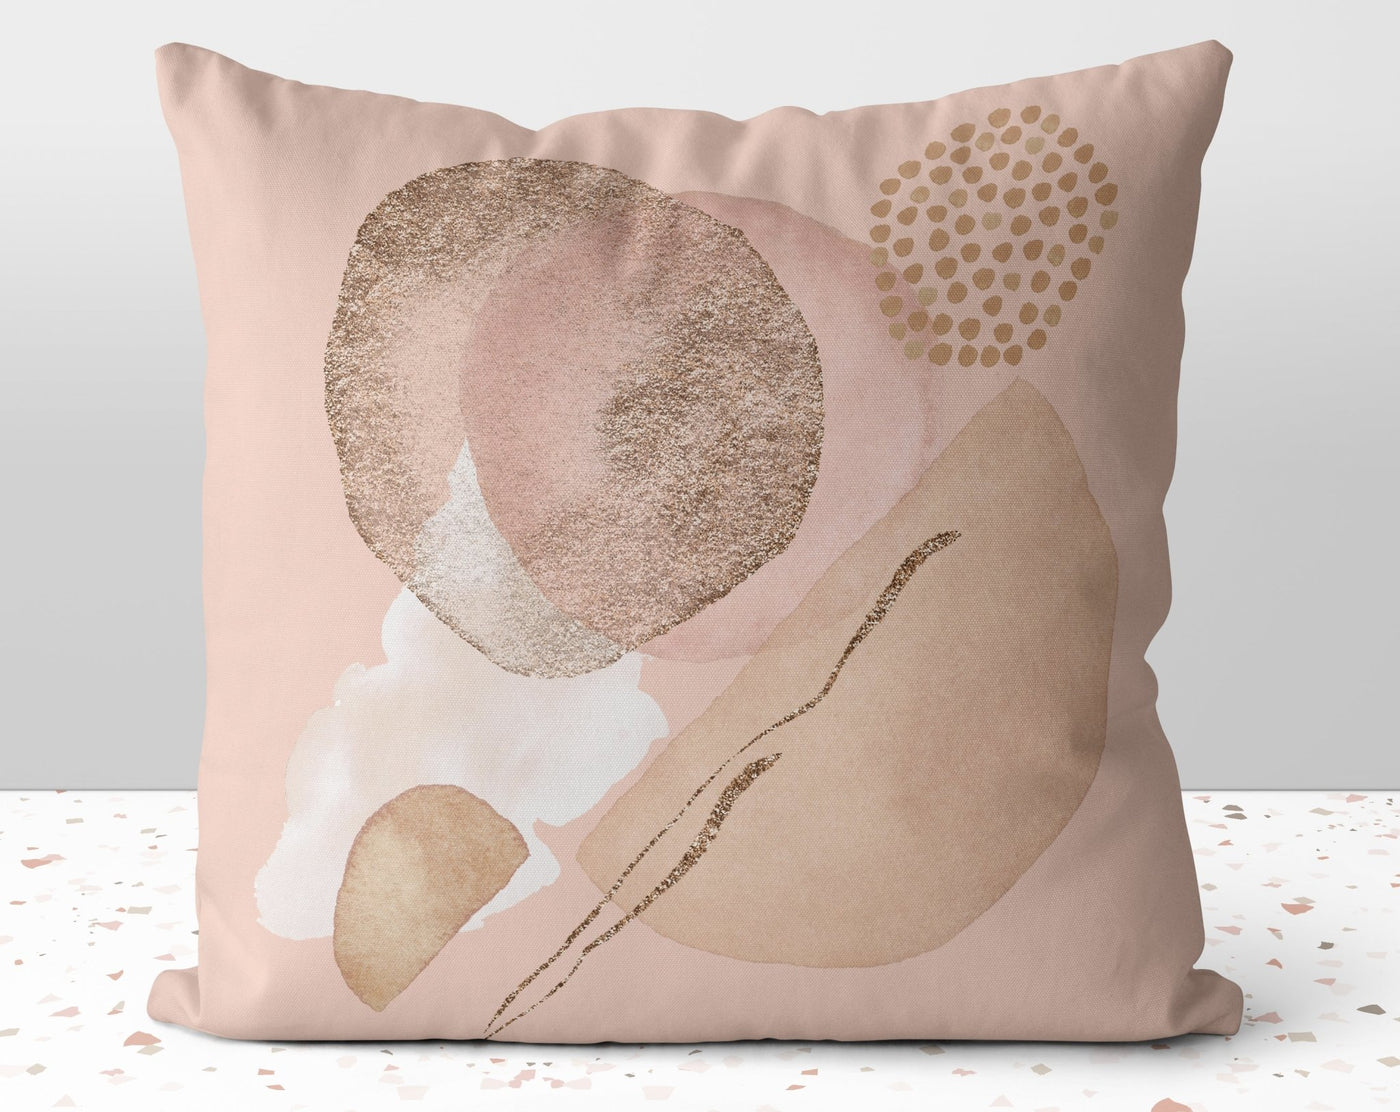 Abstract Glam All Pink Square Pillow with Dotted Accents with Cover Throw with Insert - Cush Potato Pillows